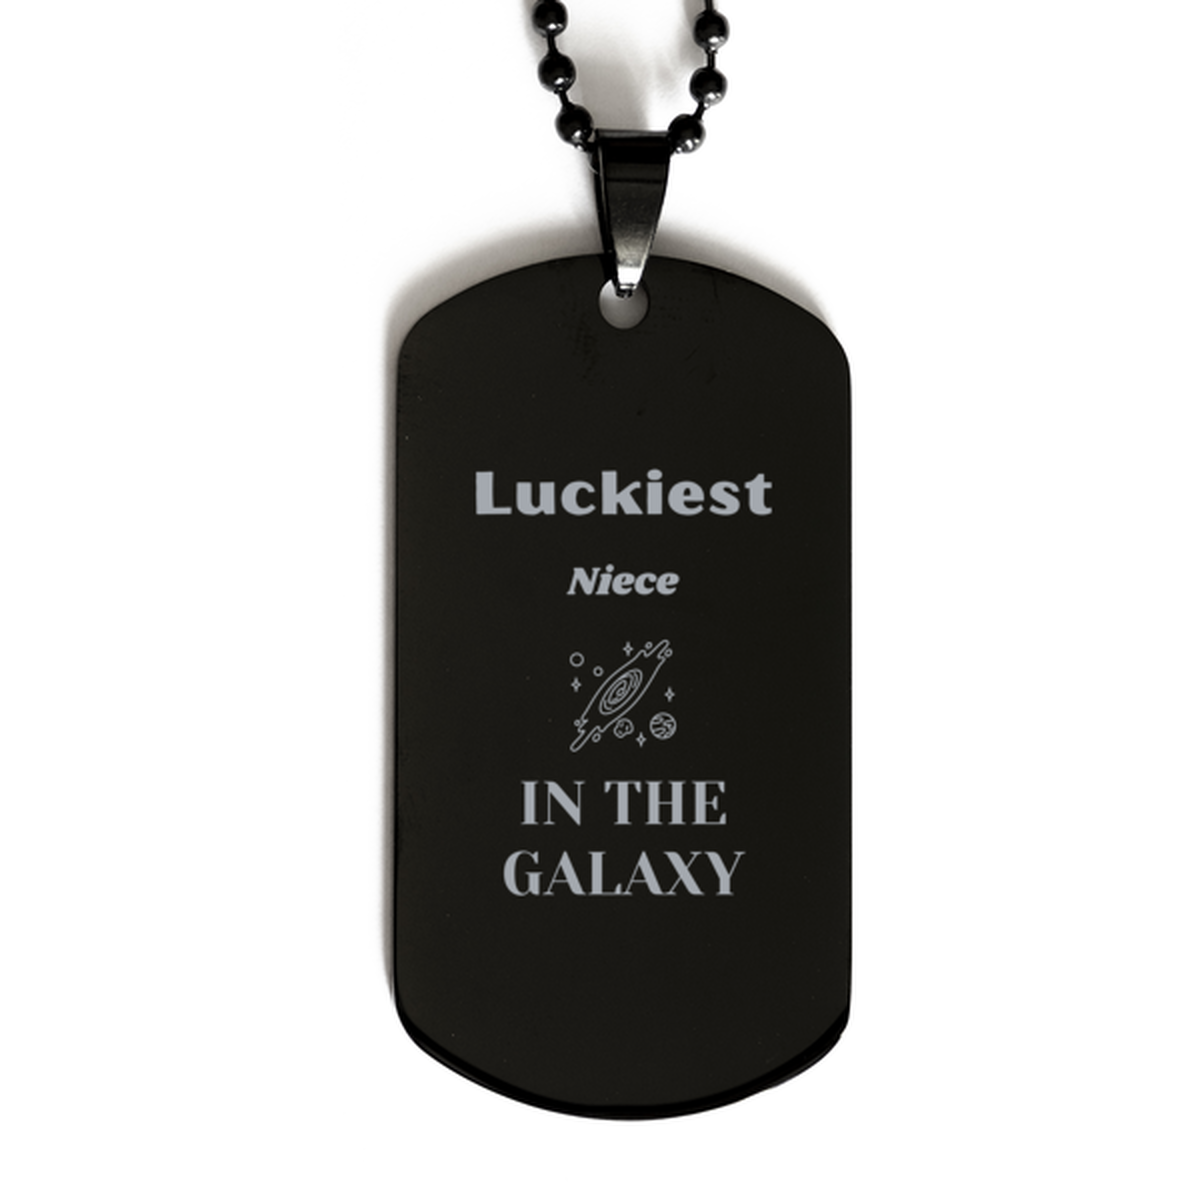 Luckiest Niece in the Galaxy, To My Niece Engraved Gifts, Christmas Niece Black Dog Tag Gifts, X-mas Birthday Unique Gifts For Niece Men Women